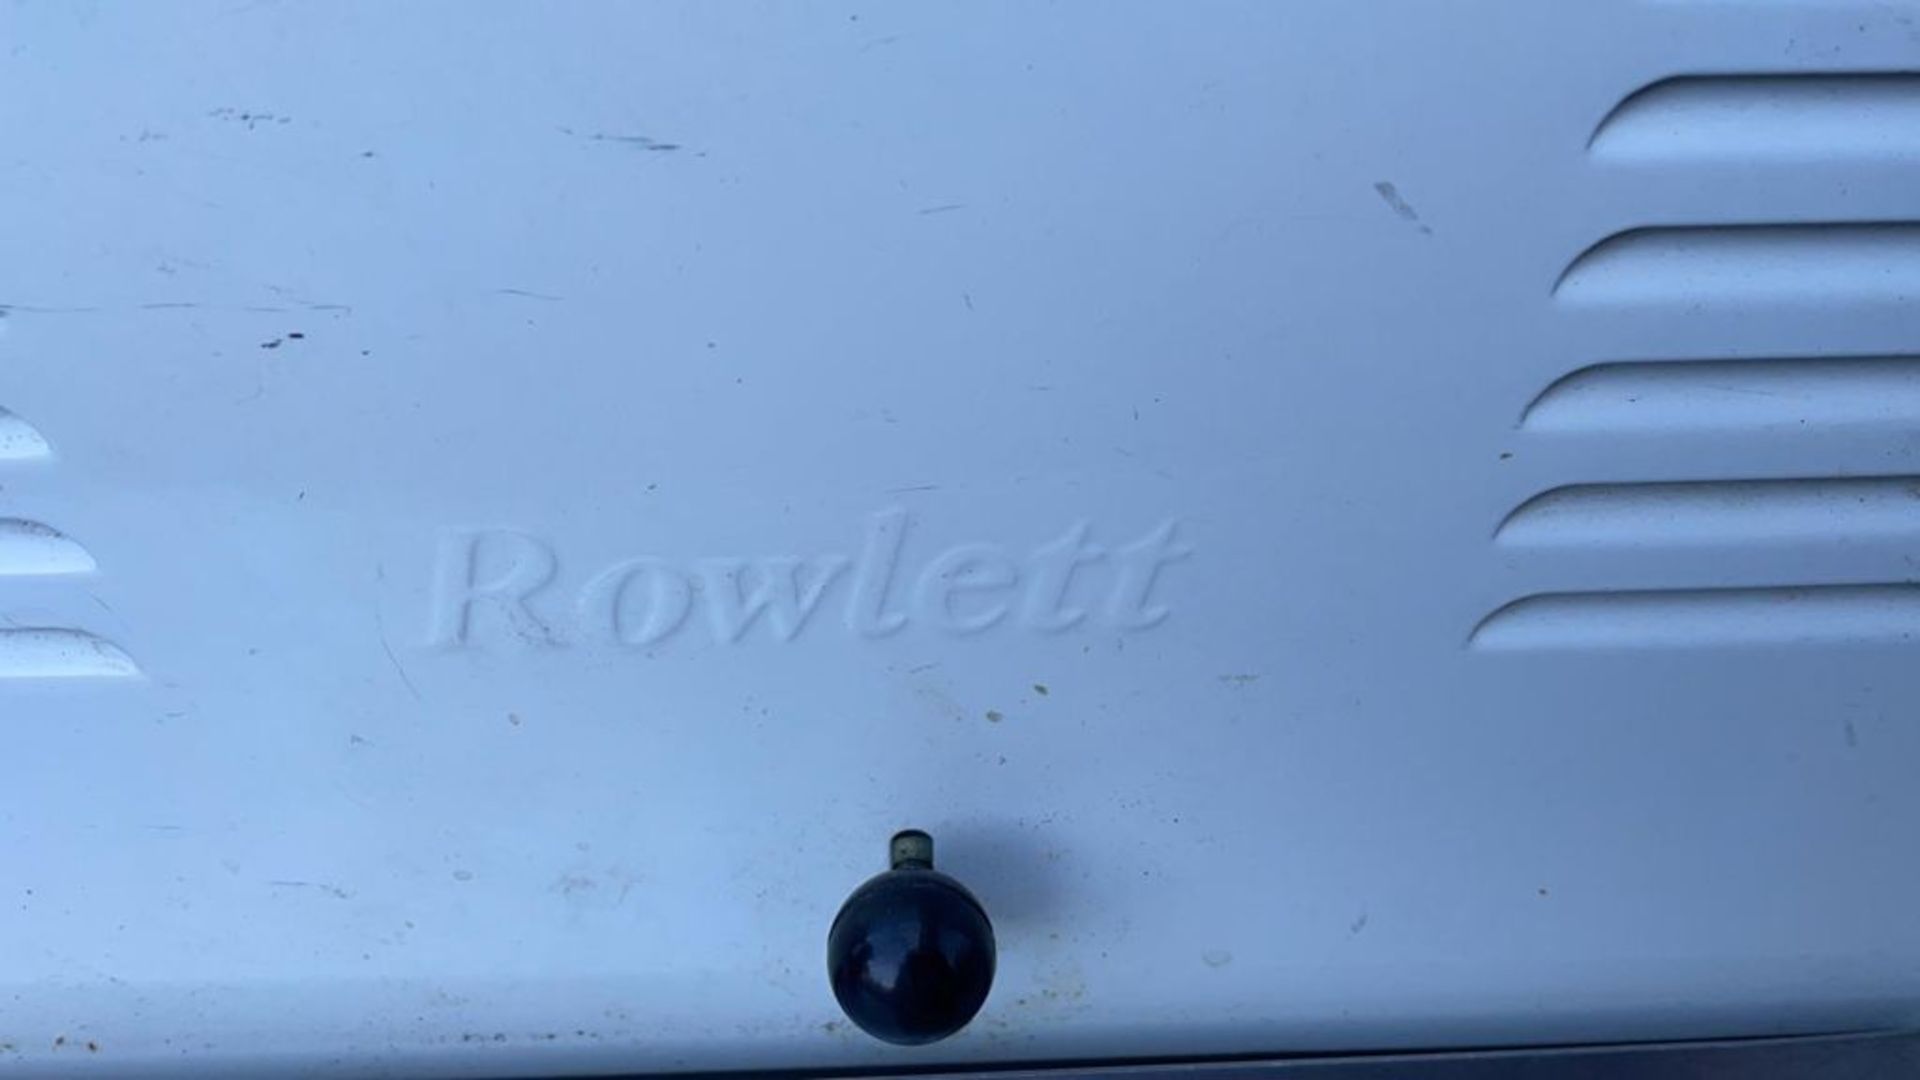 1 x Rowlett 3000w 6 Slice Commercial Toaster - 240v - CL667 - Location: Brighton, Sussex, BN24 - Image 3 of 3